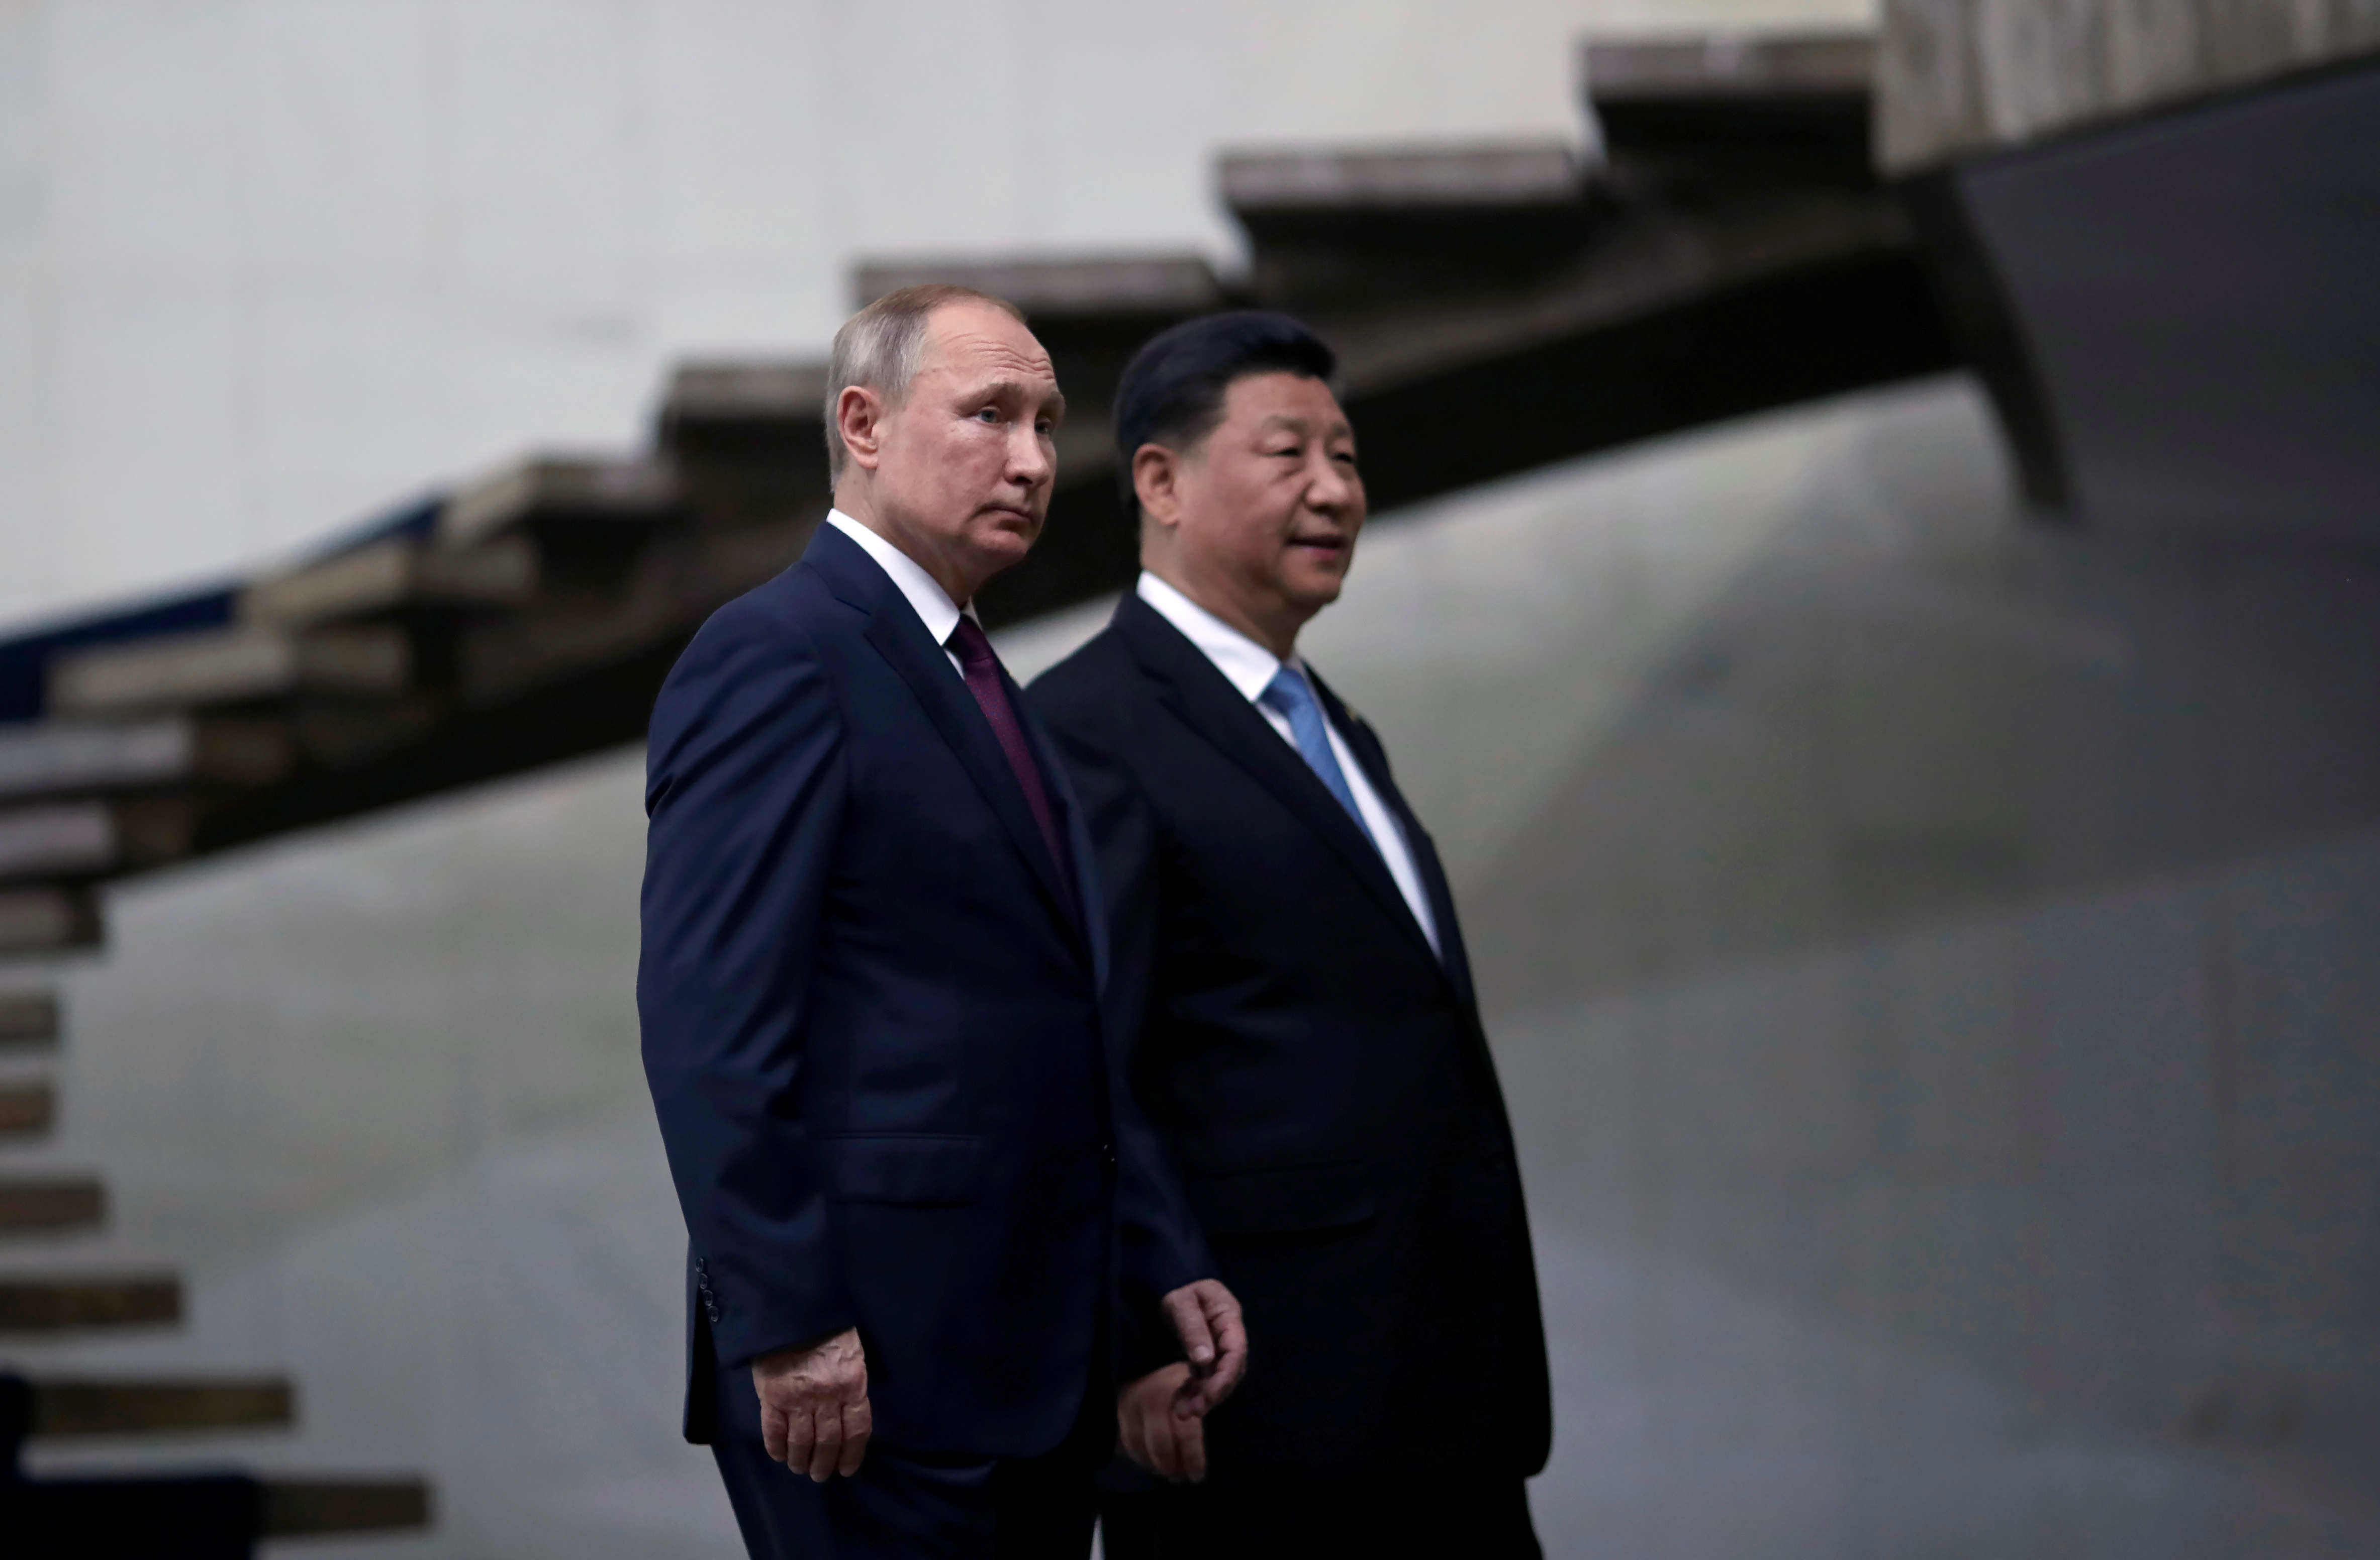 The Presidents of Russia and China, Vladimir Putin and Xi Jinping